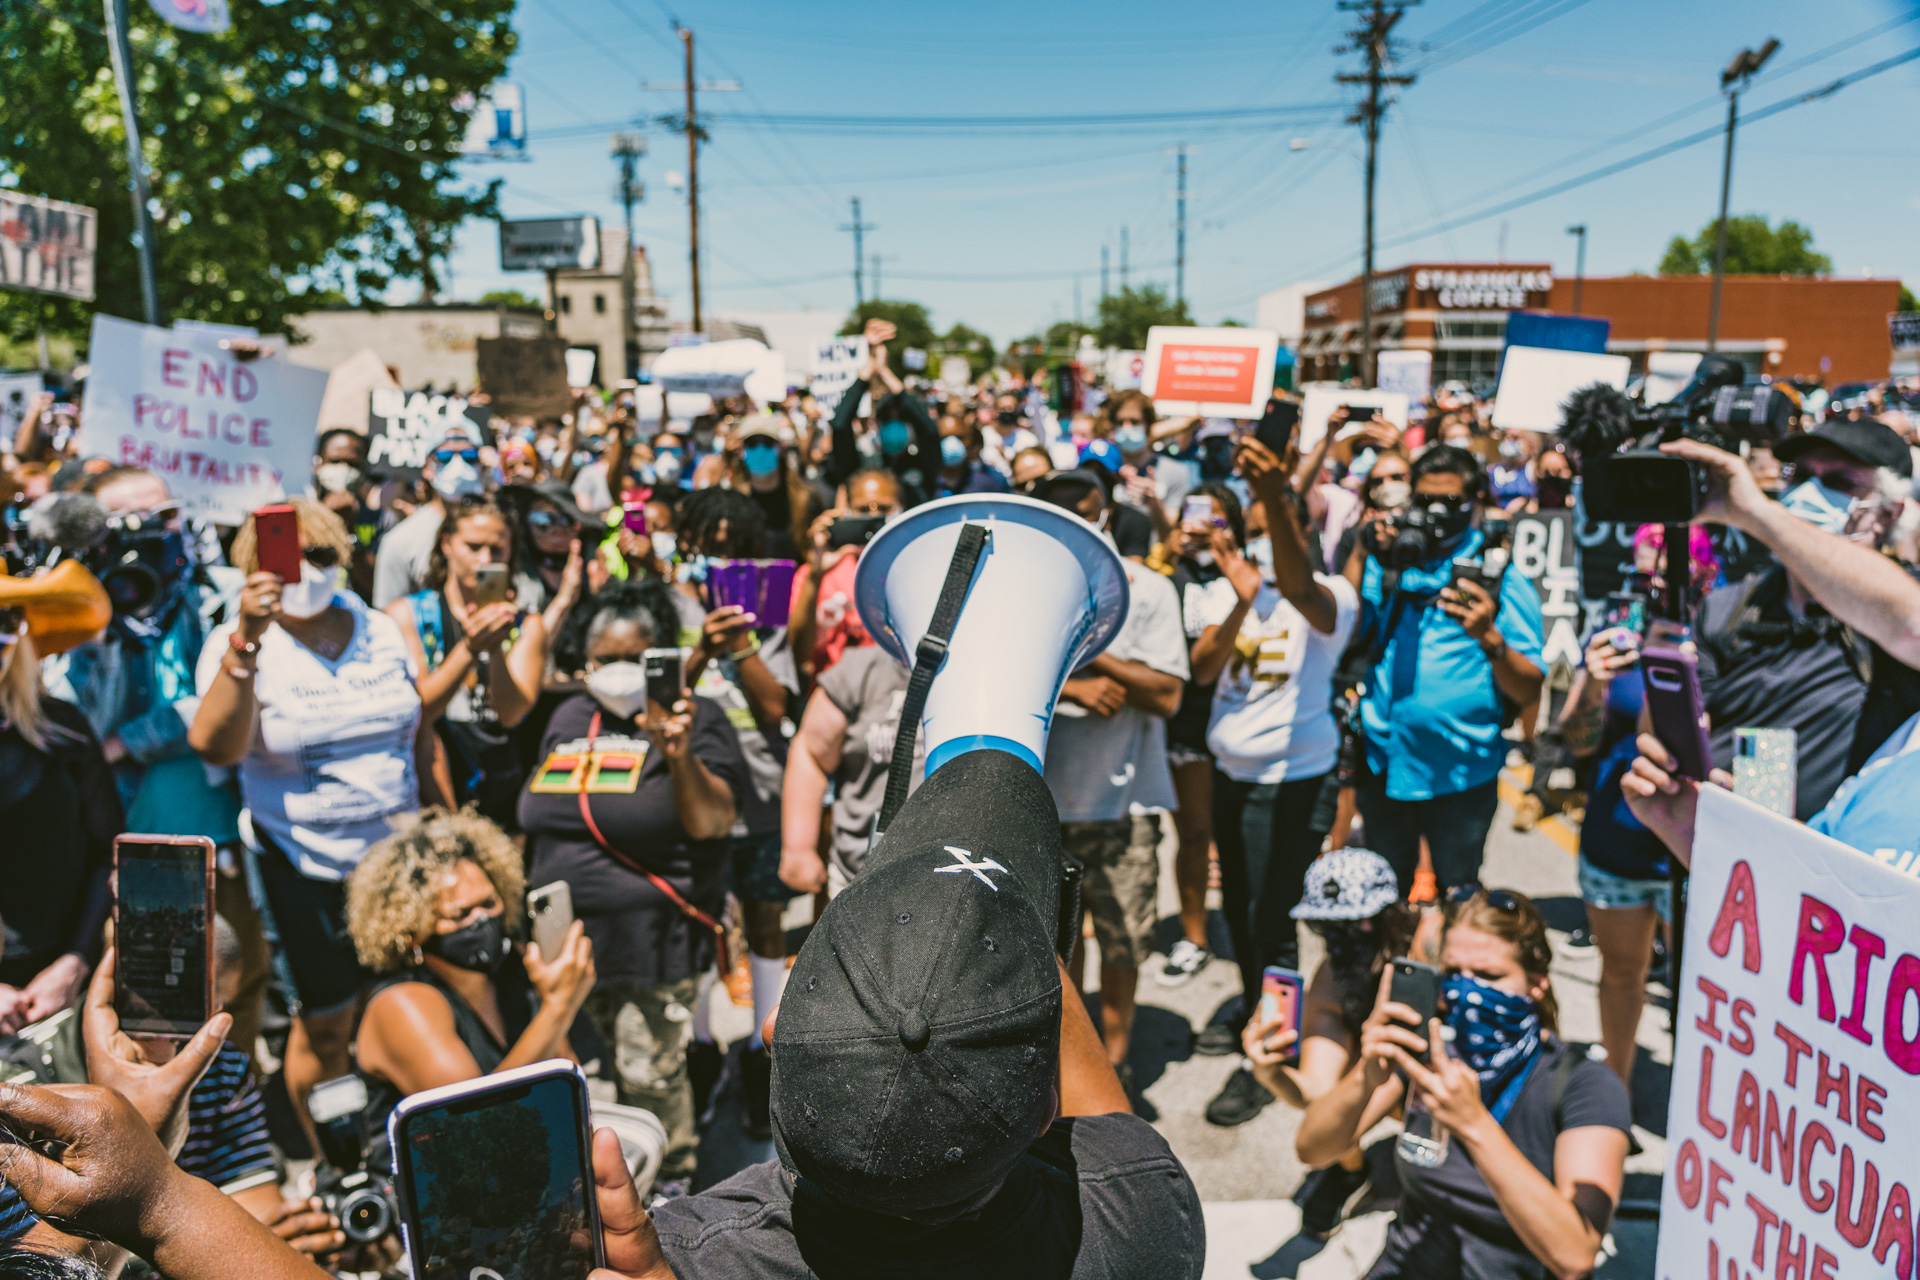 Tulsa activist Greg Robinson leads a protest in downtown Tulsa to protest racial in justice and police brutality in the wake of George Floyd's death.